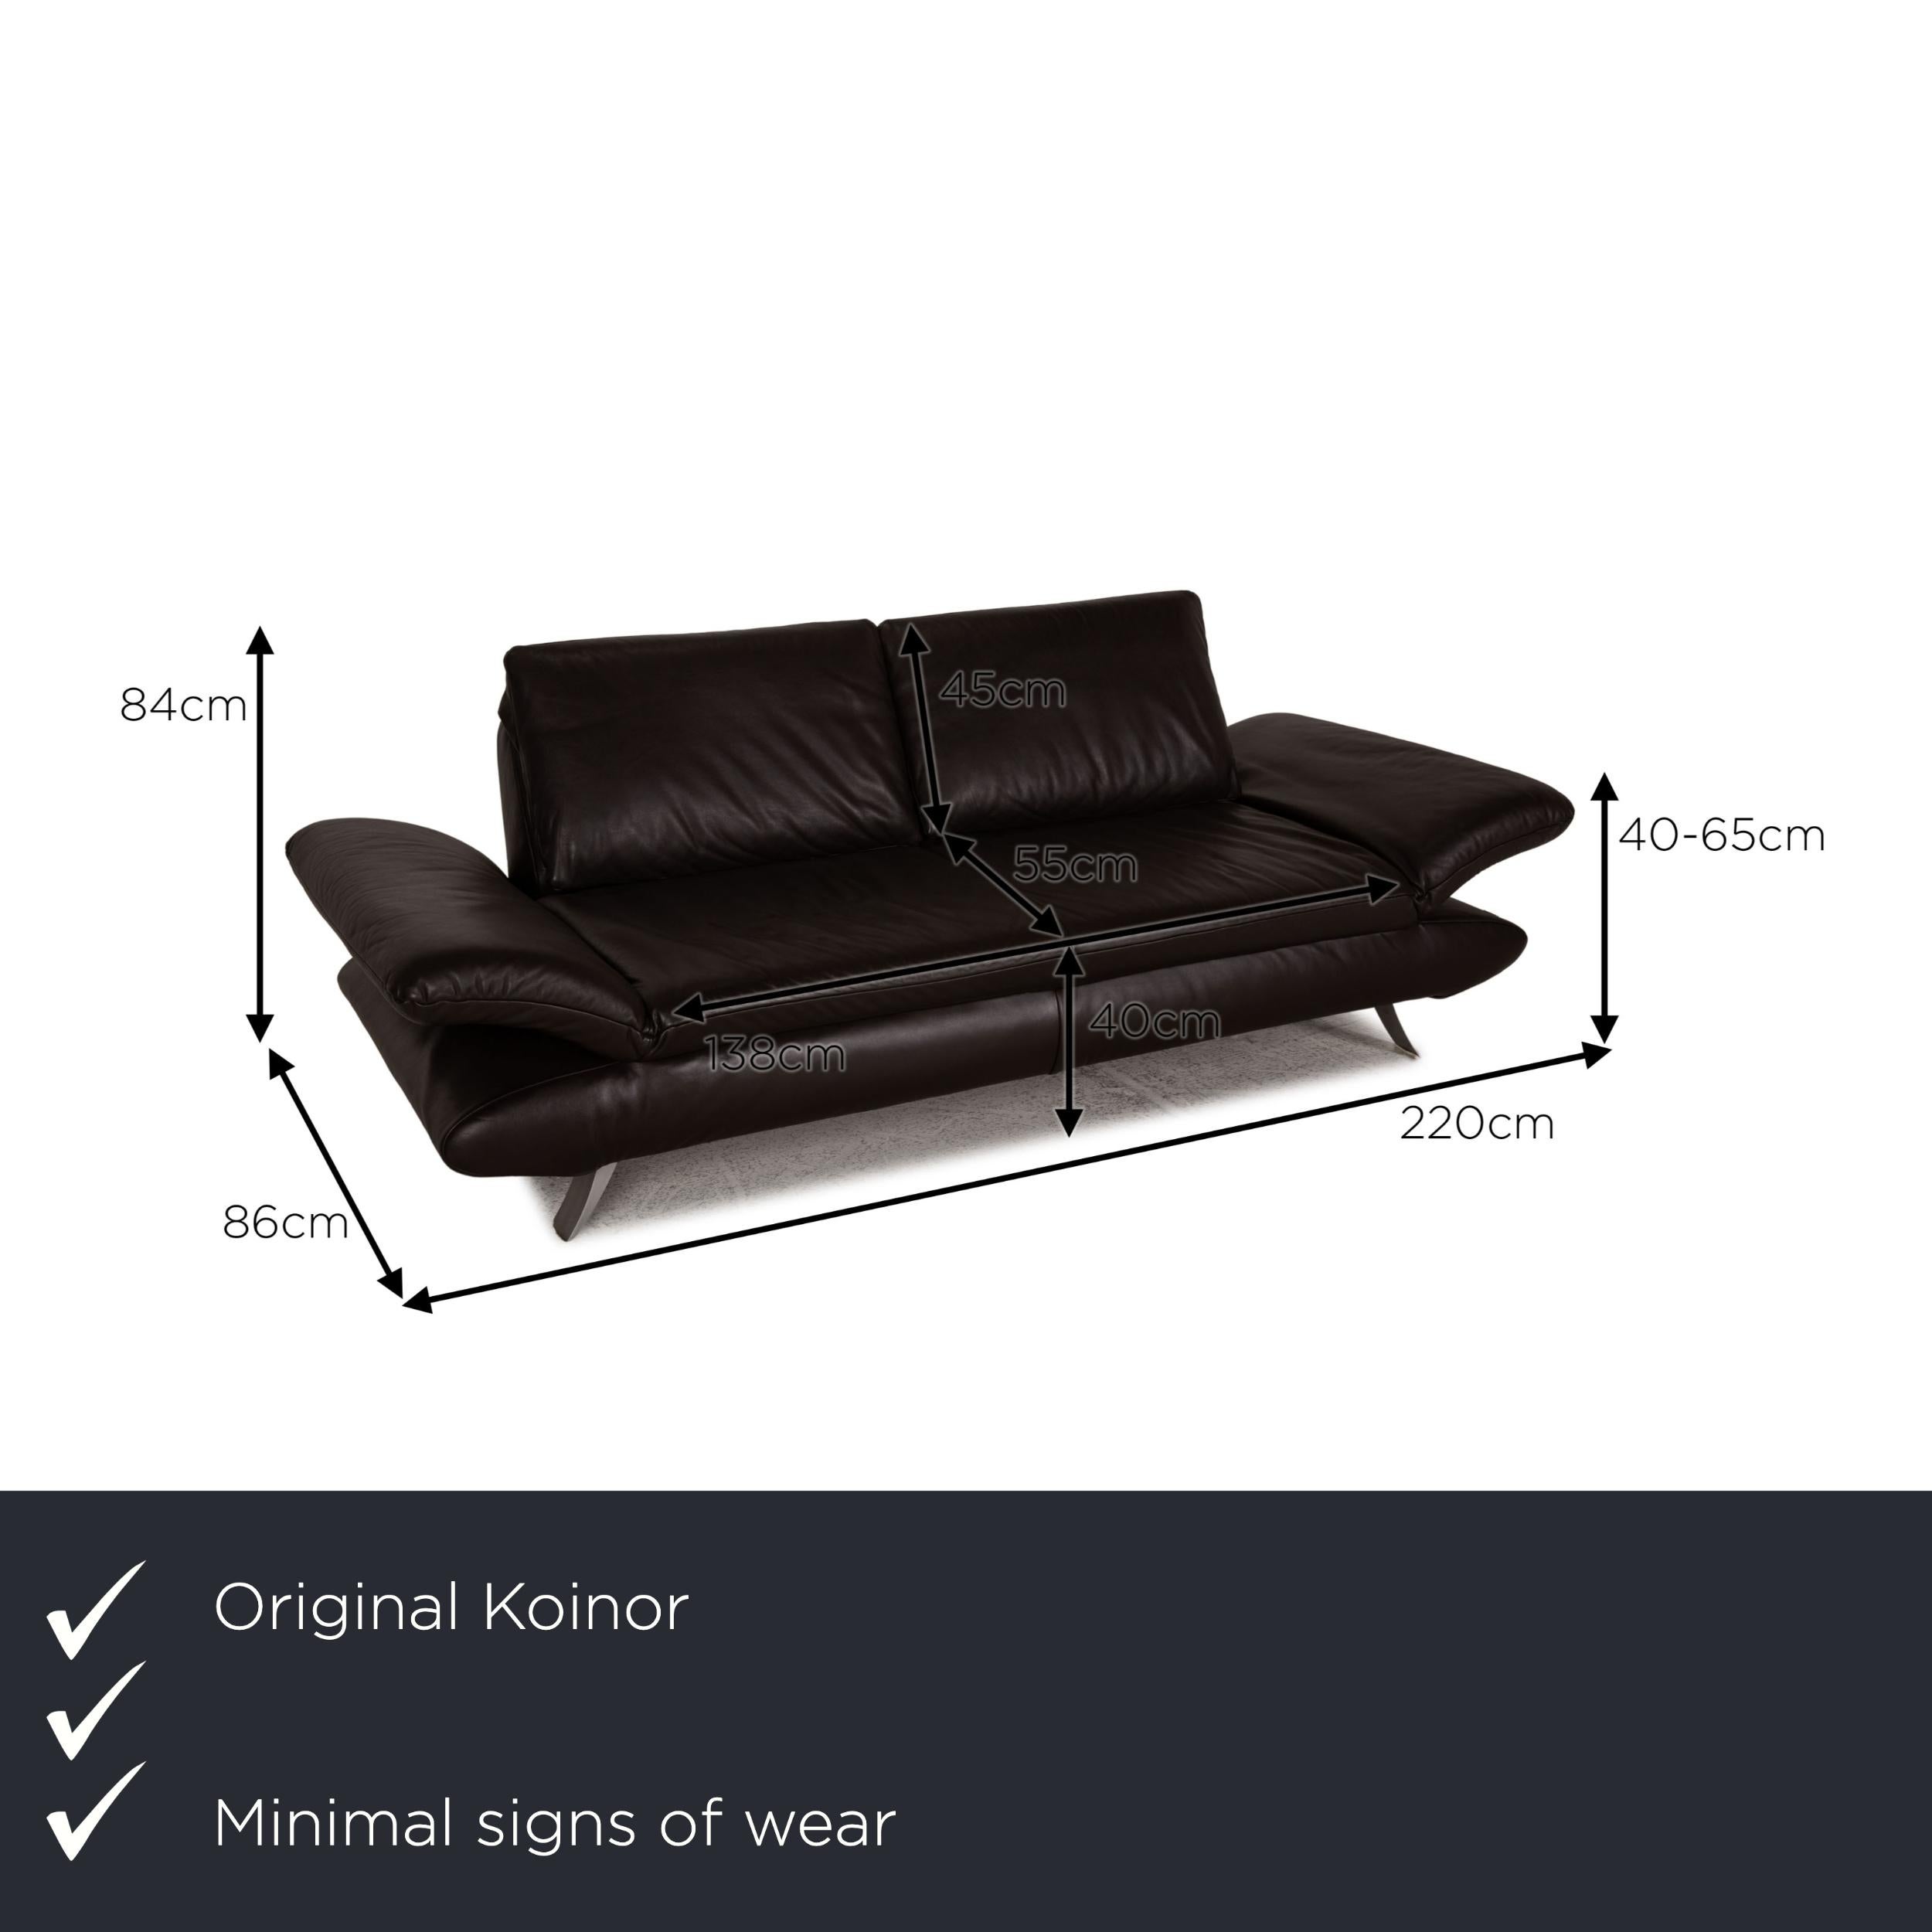 We present to you a Koinor Rossini leather sofa dark brown two-seater couch function.

Product measurements in centimeters:

depth: 86
width: 220
height: 84
seat height: 40
rest height: 40
seat depth: 55
seat width: 138
back height: